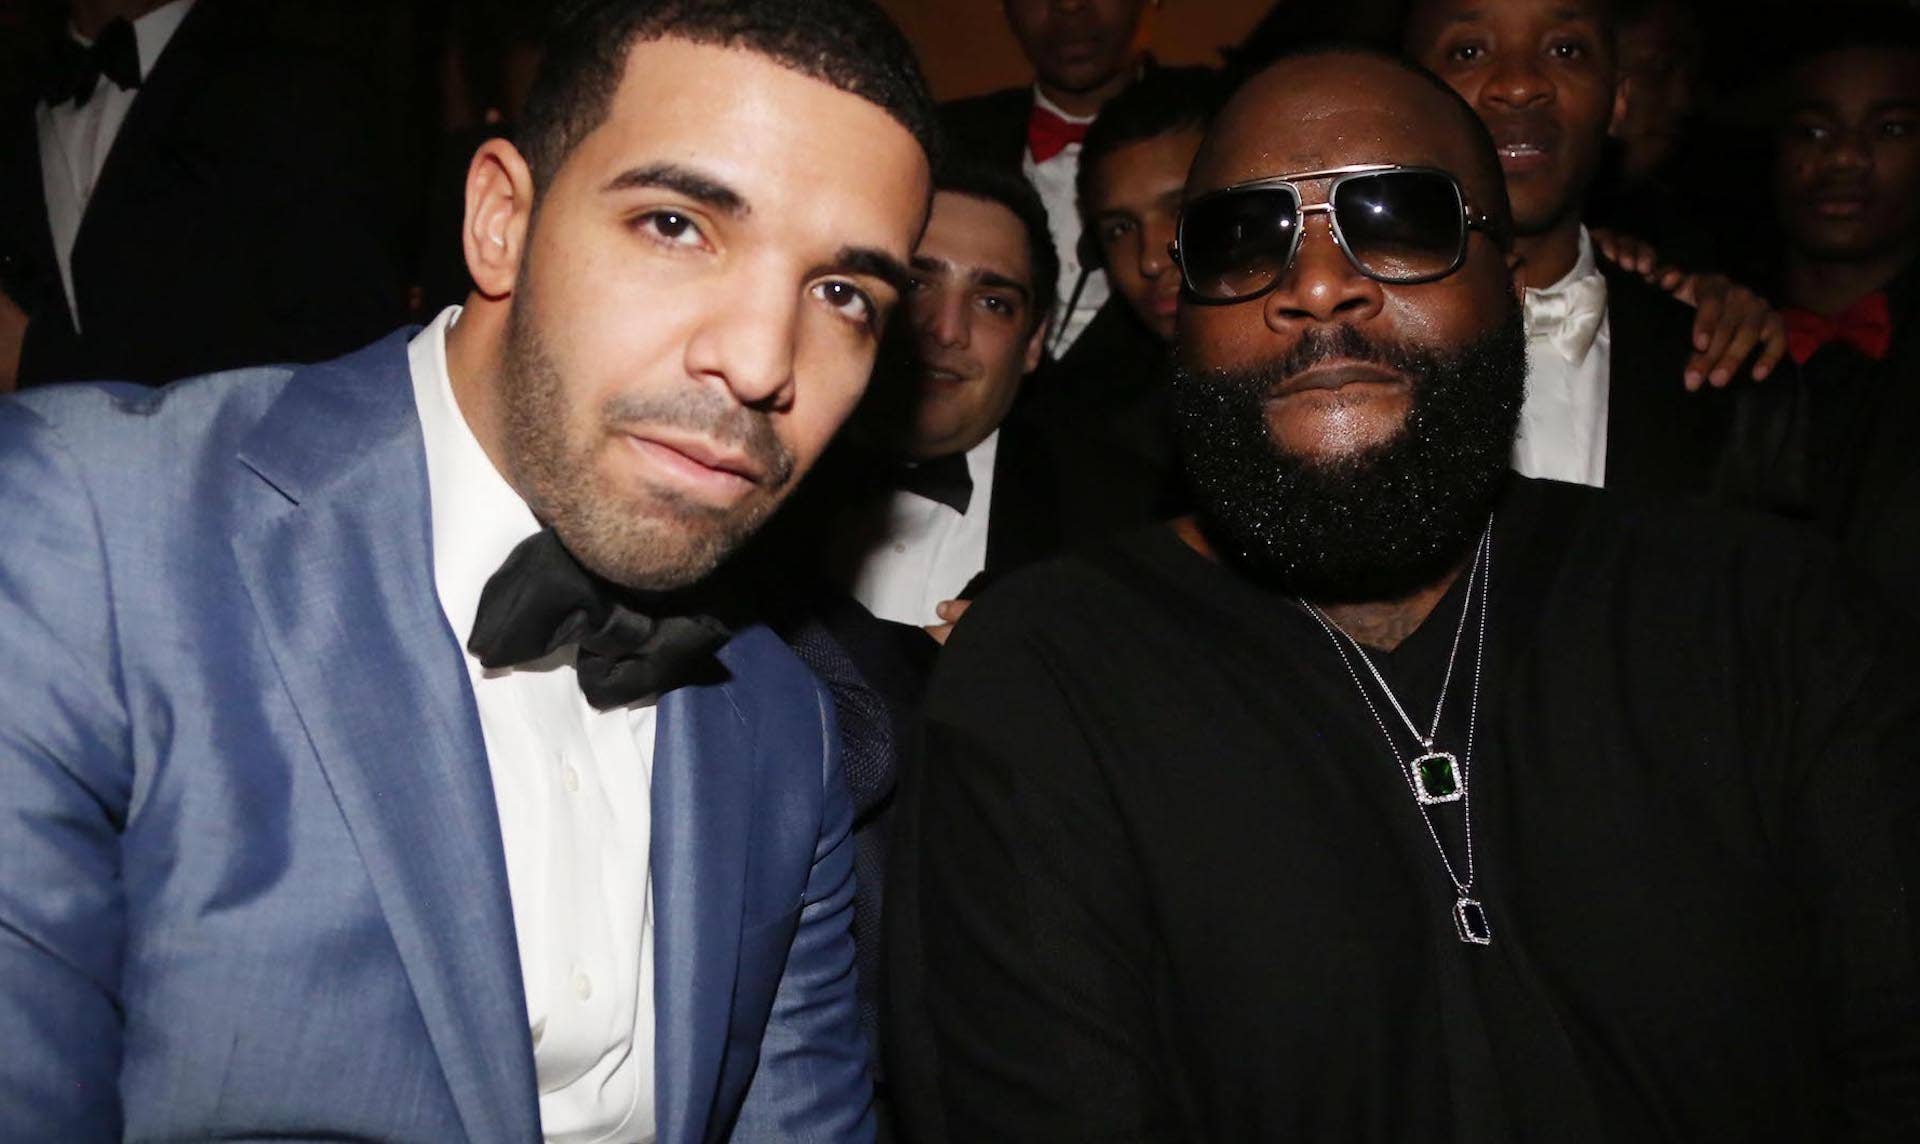 Drake and Rick Ross attend a NYE party in 2013